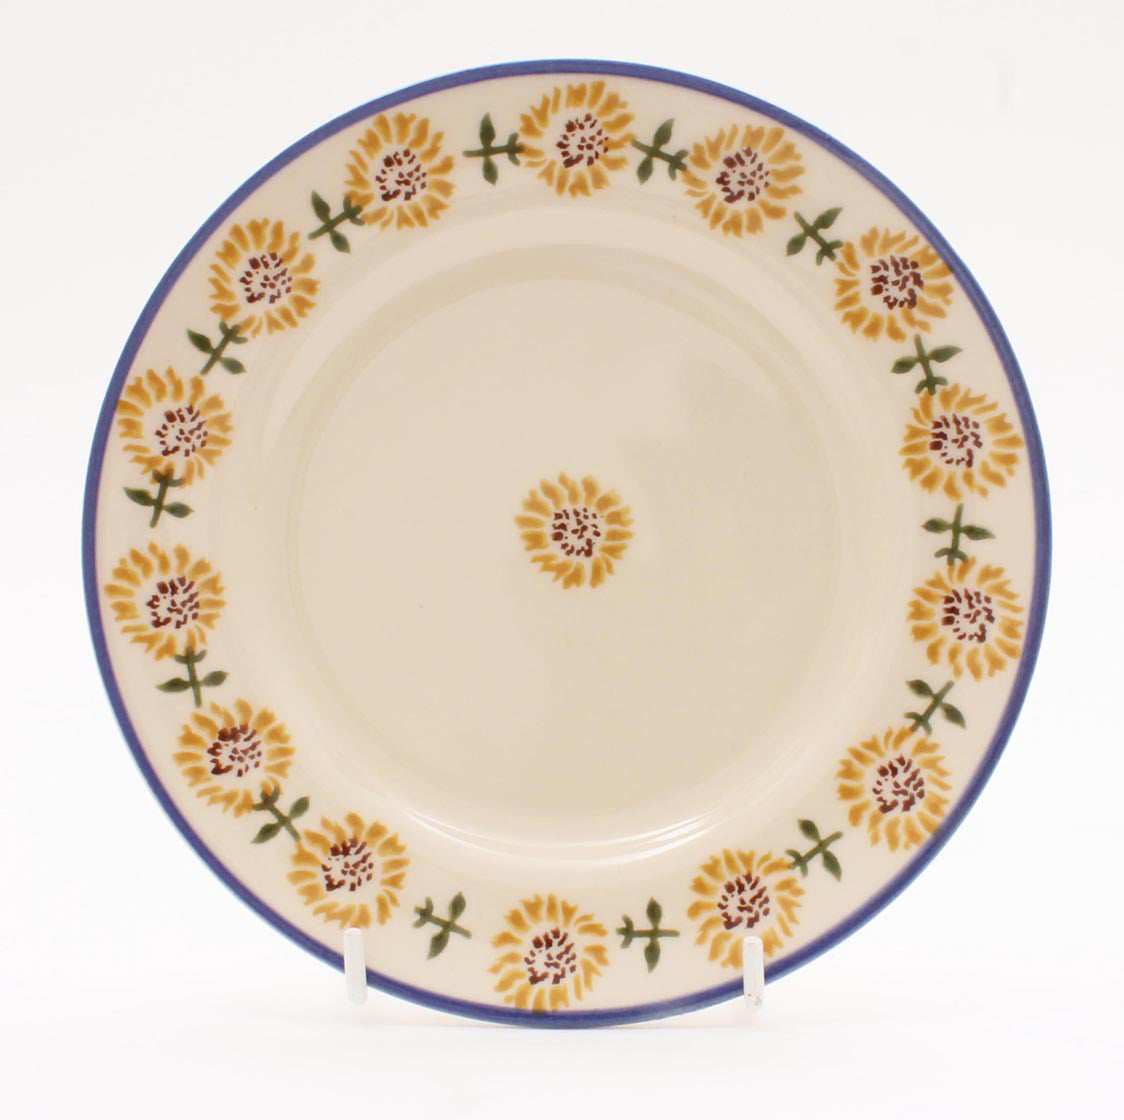 Brixton Pottery Sunflowers handmade pottery 7 inch side plate